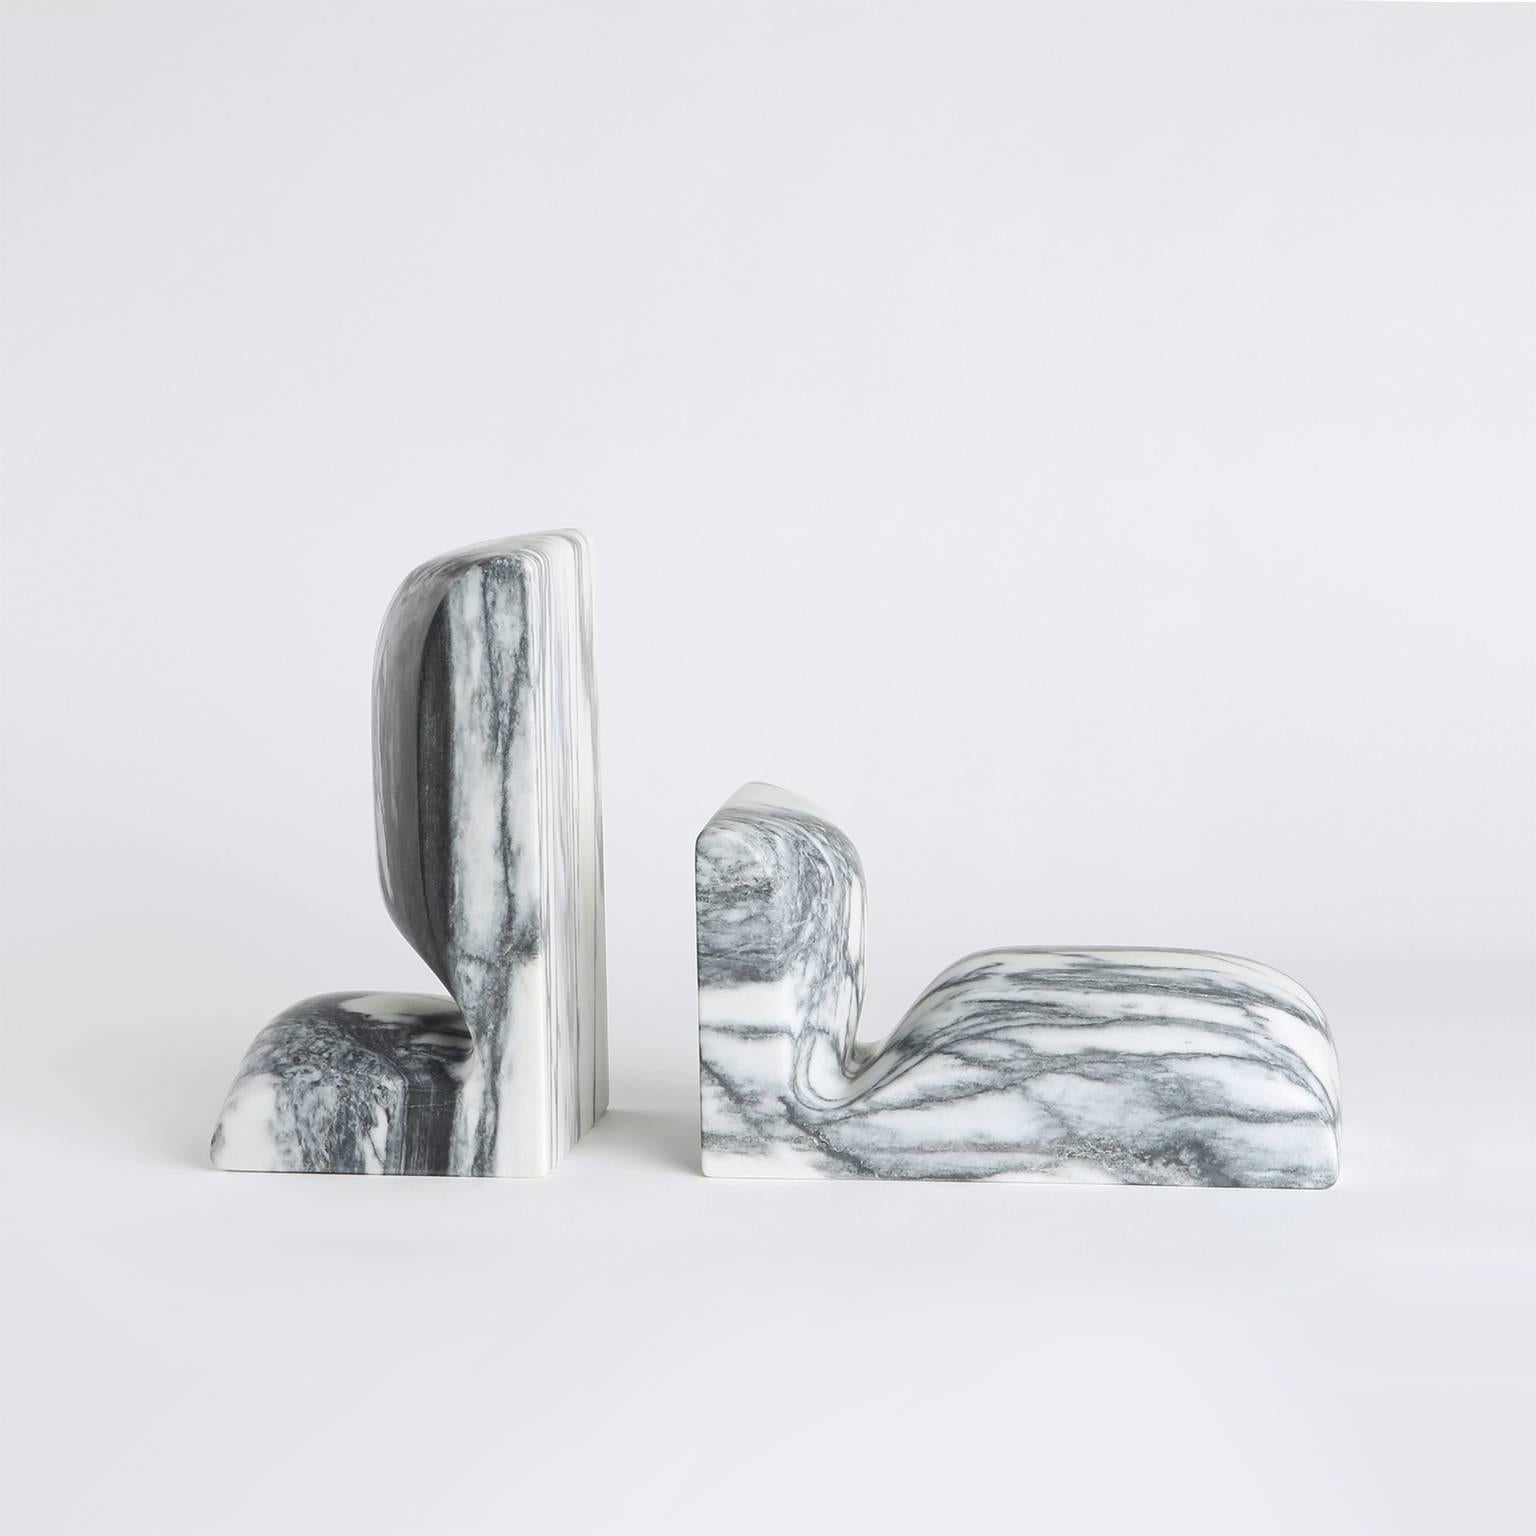 Christophe Delcourt for Collection Particuliere

With SLO bookends, the folding of the material directly refers to the folding of the page of a book.

Marble here pretends it can be bent when keeping right angels. A dialogue between sharpness